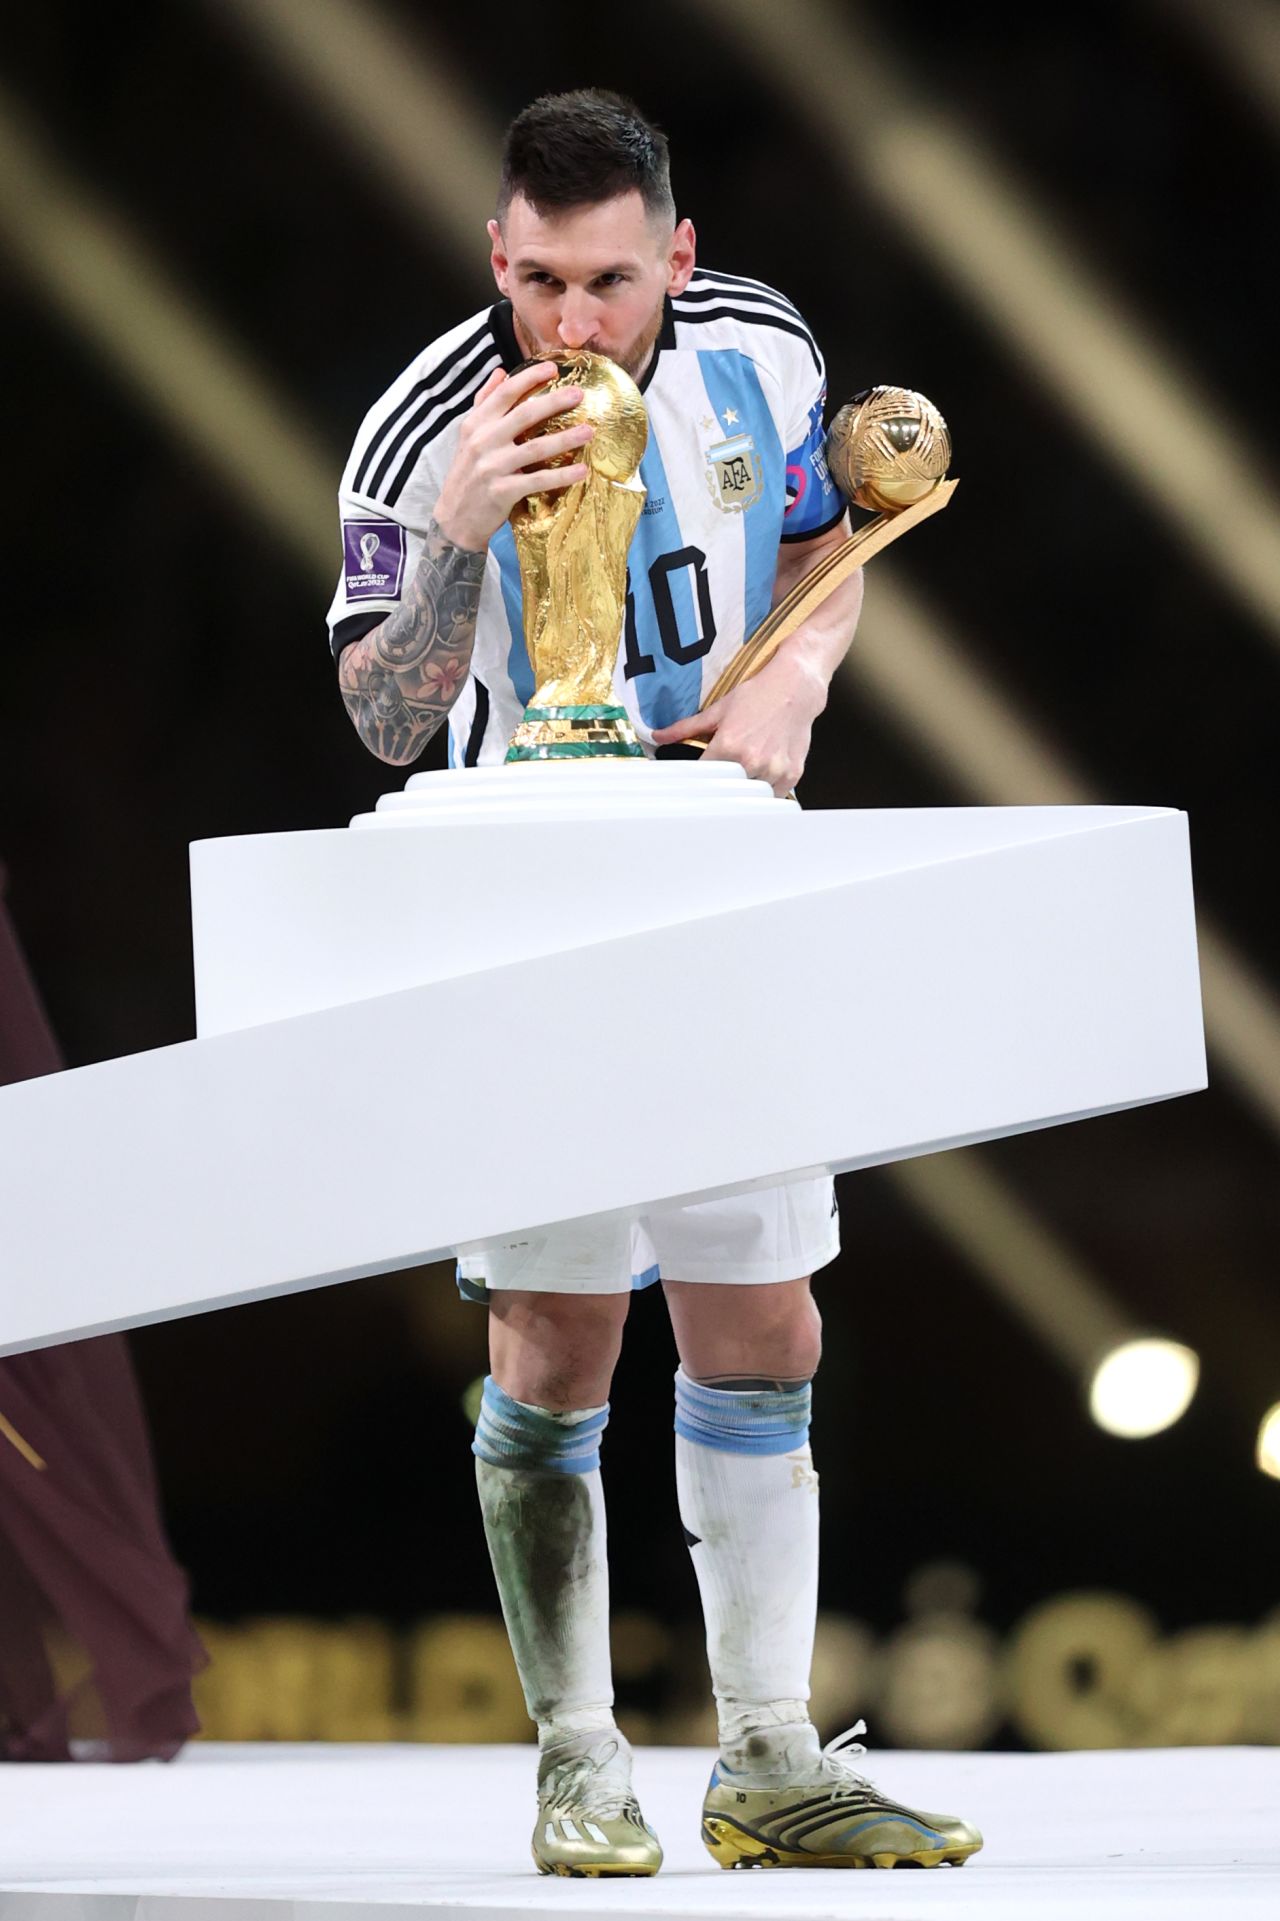 Messi kisses the World Cup trophy after the 2022 final. Messi is holding the Golden Ball trophy, which is awarded to the tournament's best player.